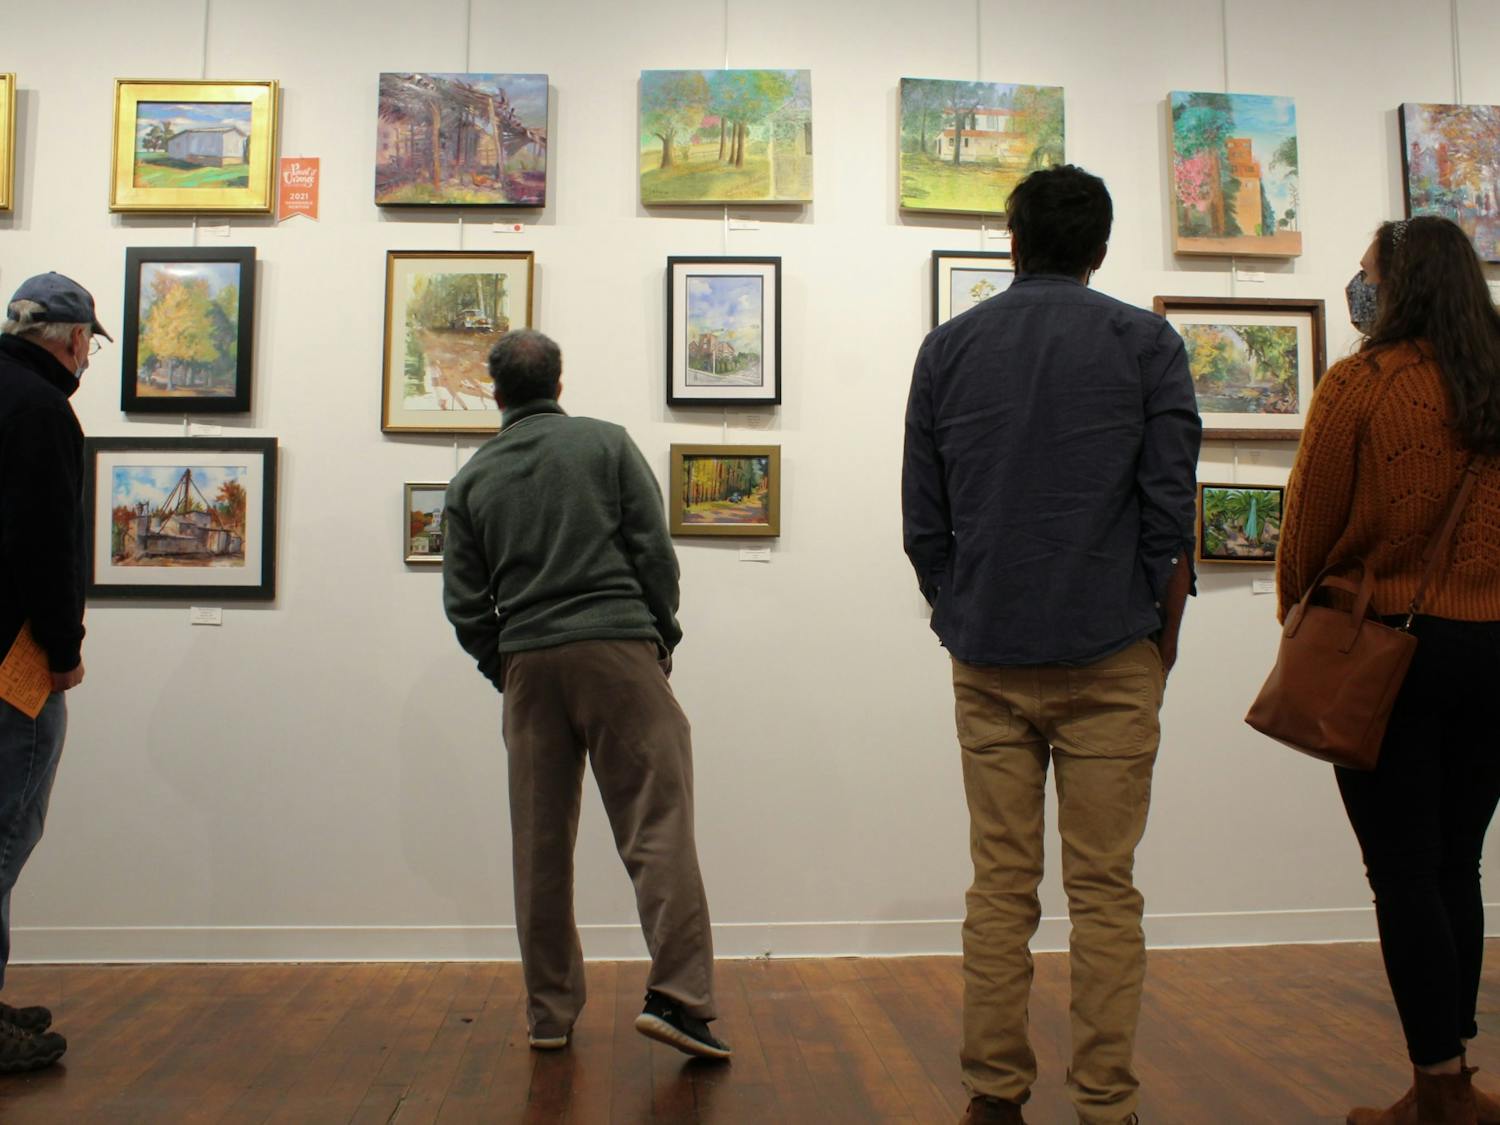 Artists and viewers admire paintings submitted to the 5th Annual Paint It Orange competition at the Eno Arts Mill in Hillsborough on Nov. 5.